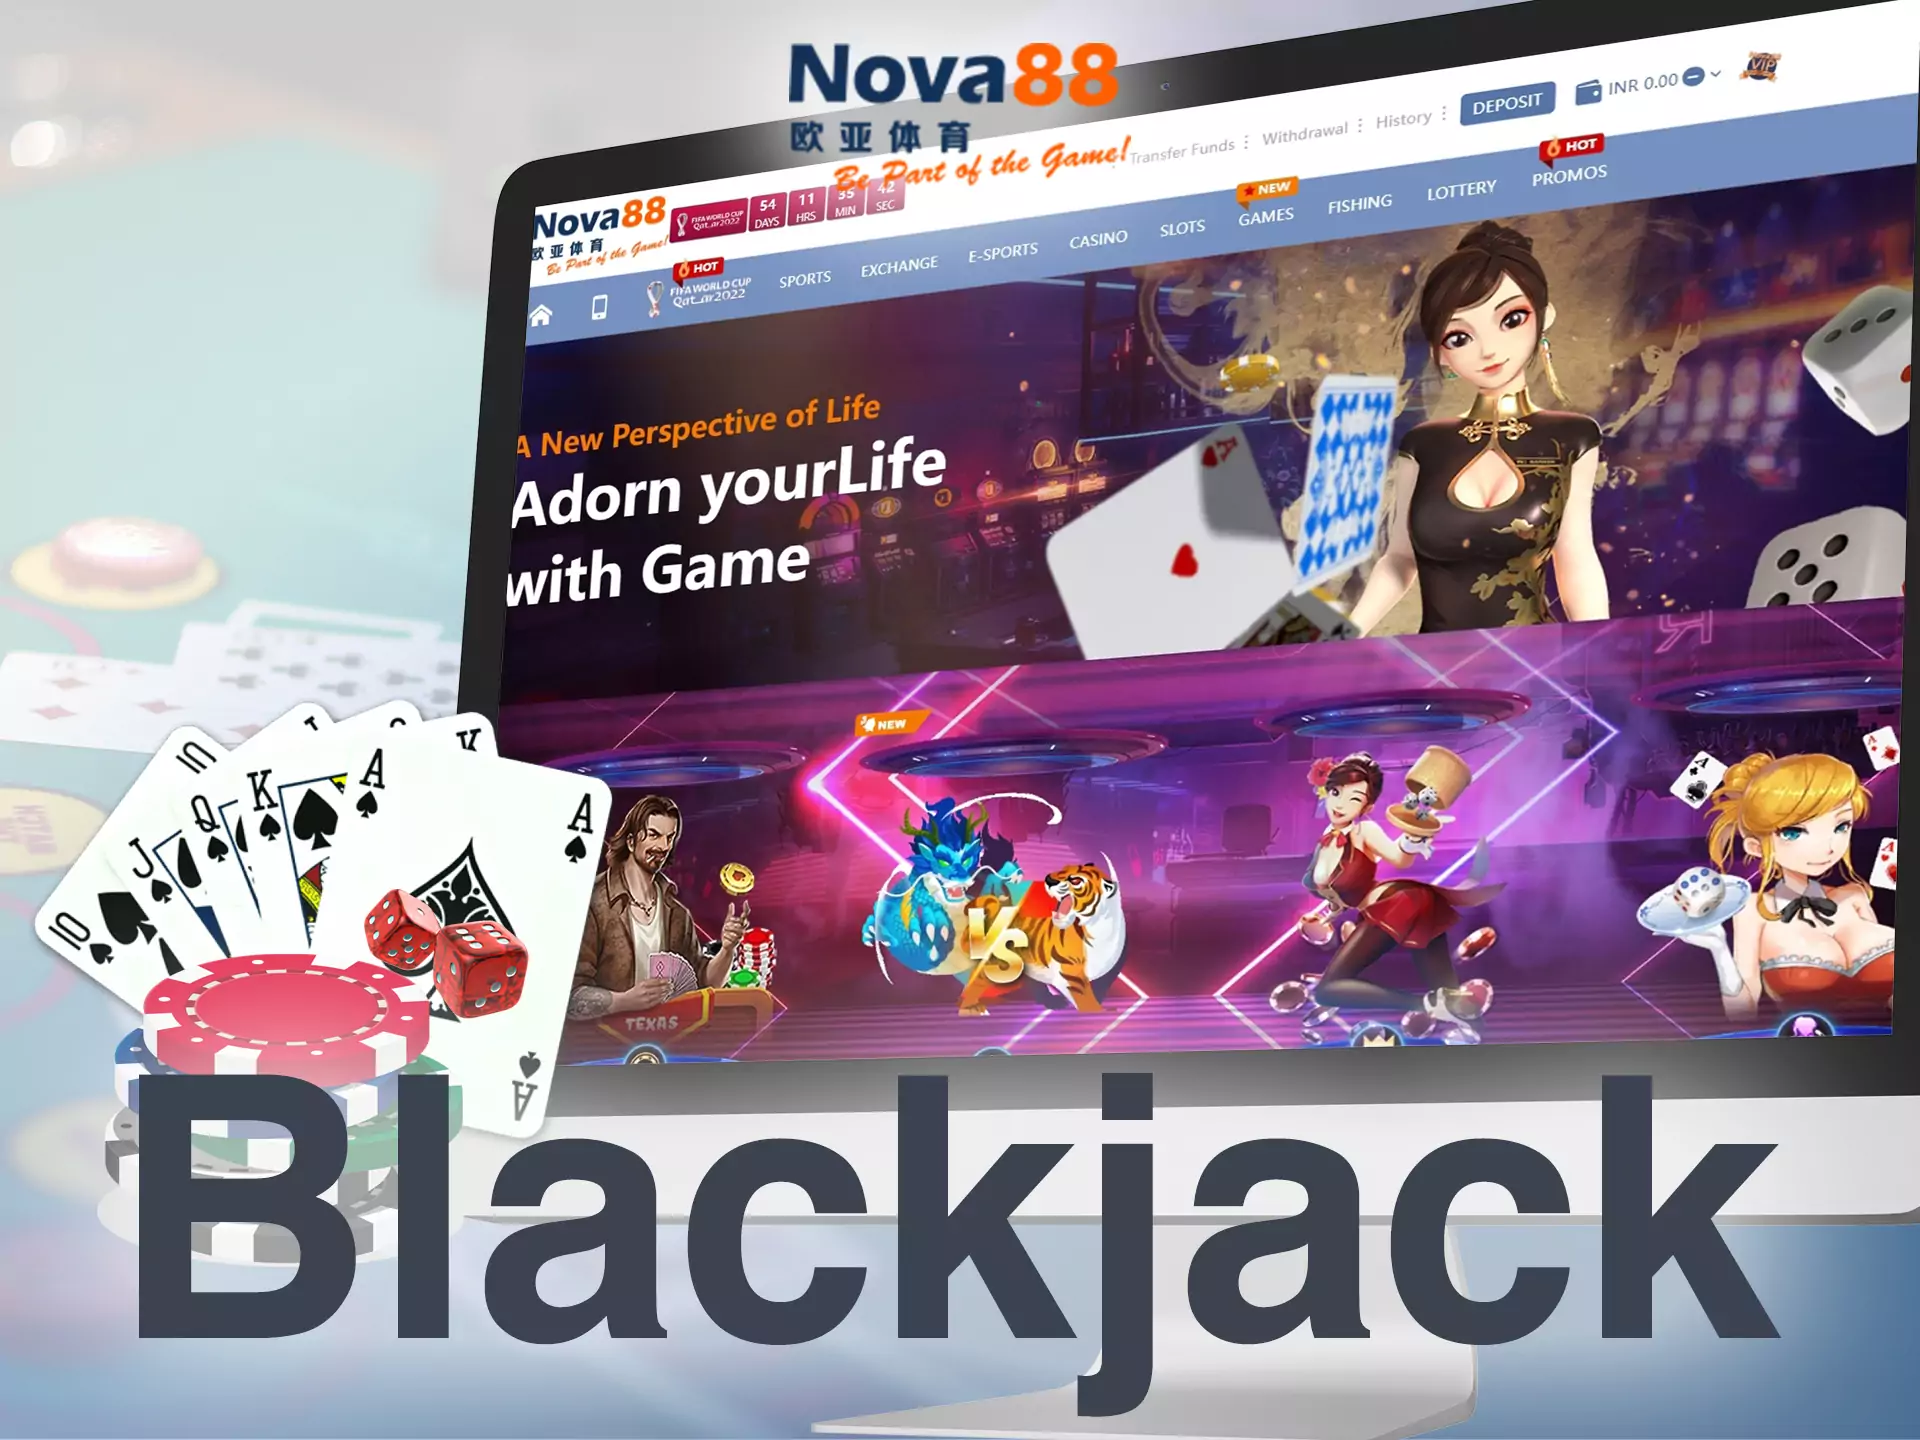 Blackjack rooms are highly presented in the Nova88 casino section.